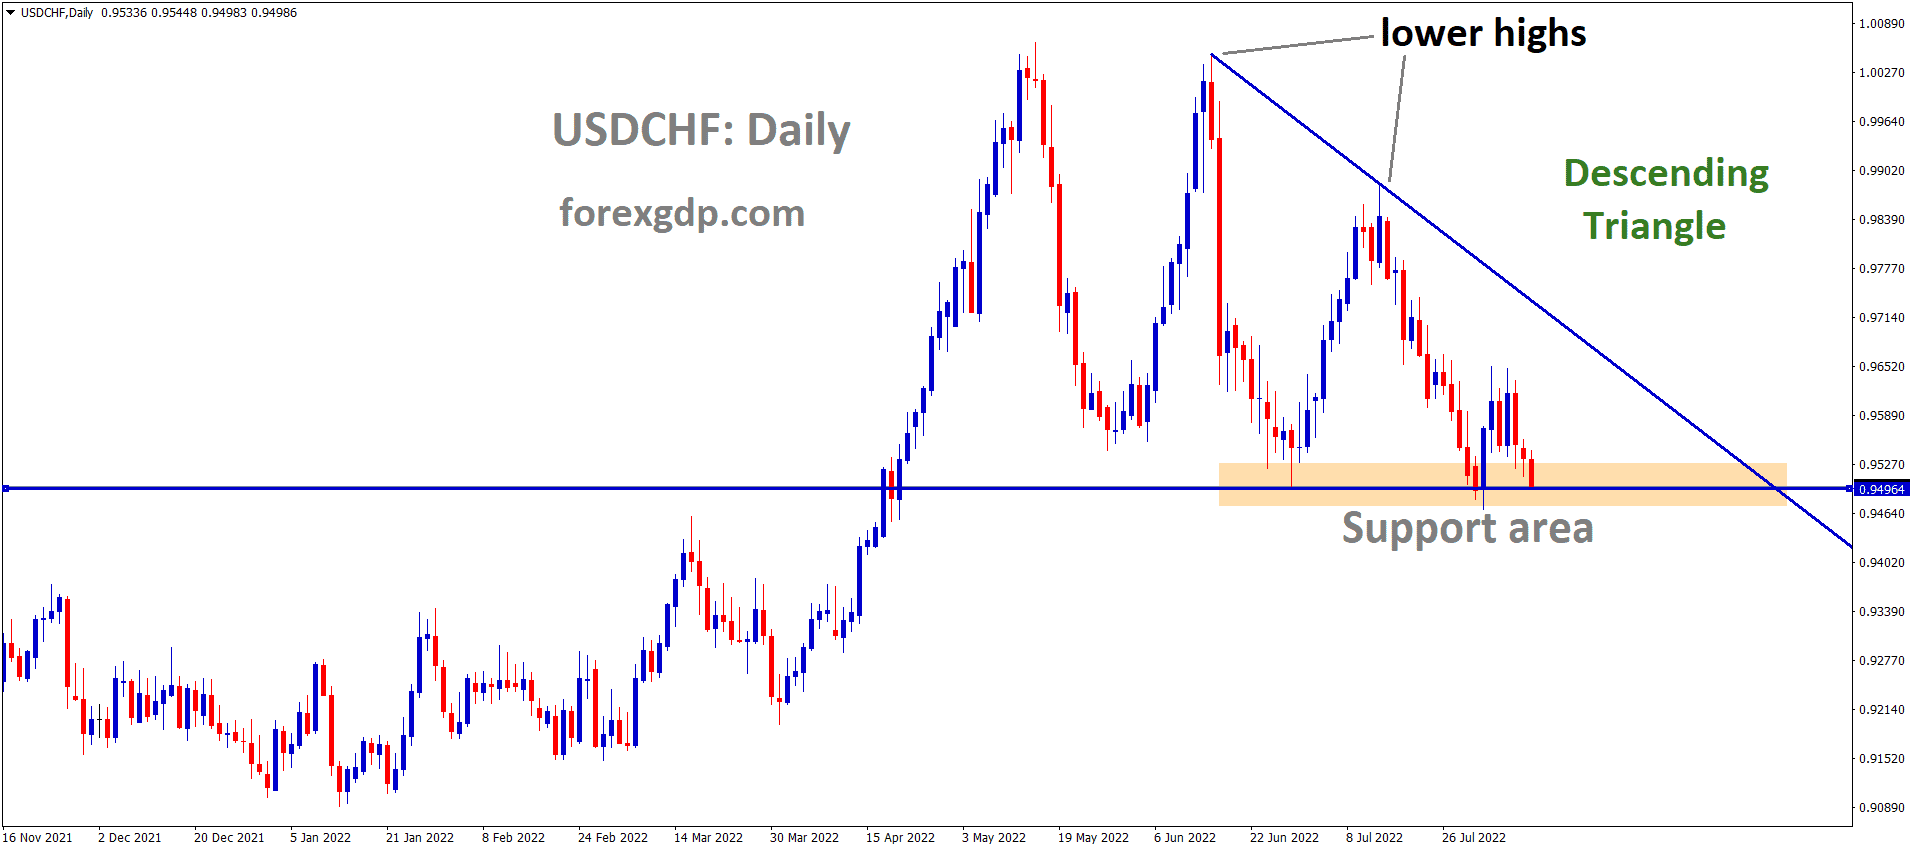 USDCHF is moving in the descending triangle pattern and the market has reached the horizontal support area of the pattern